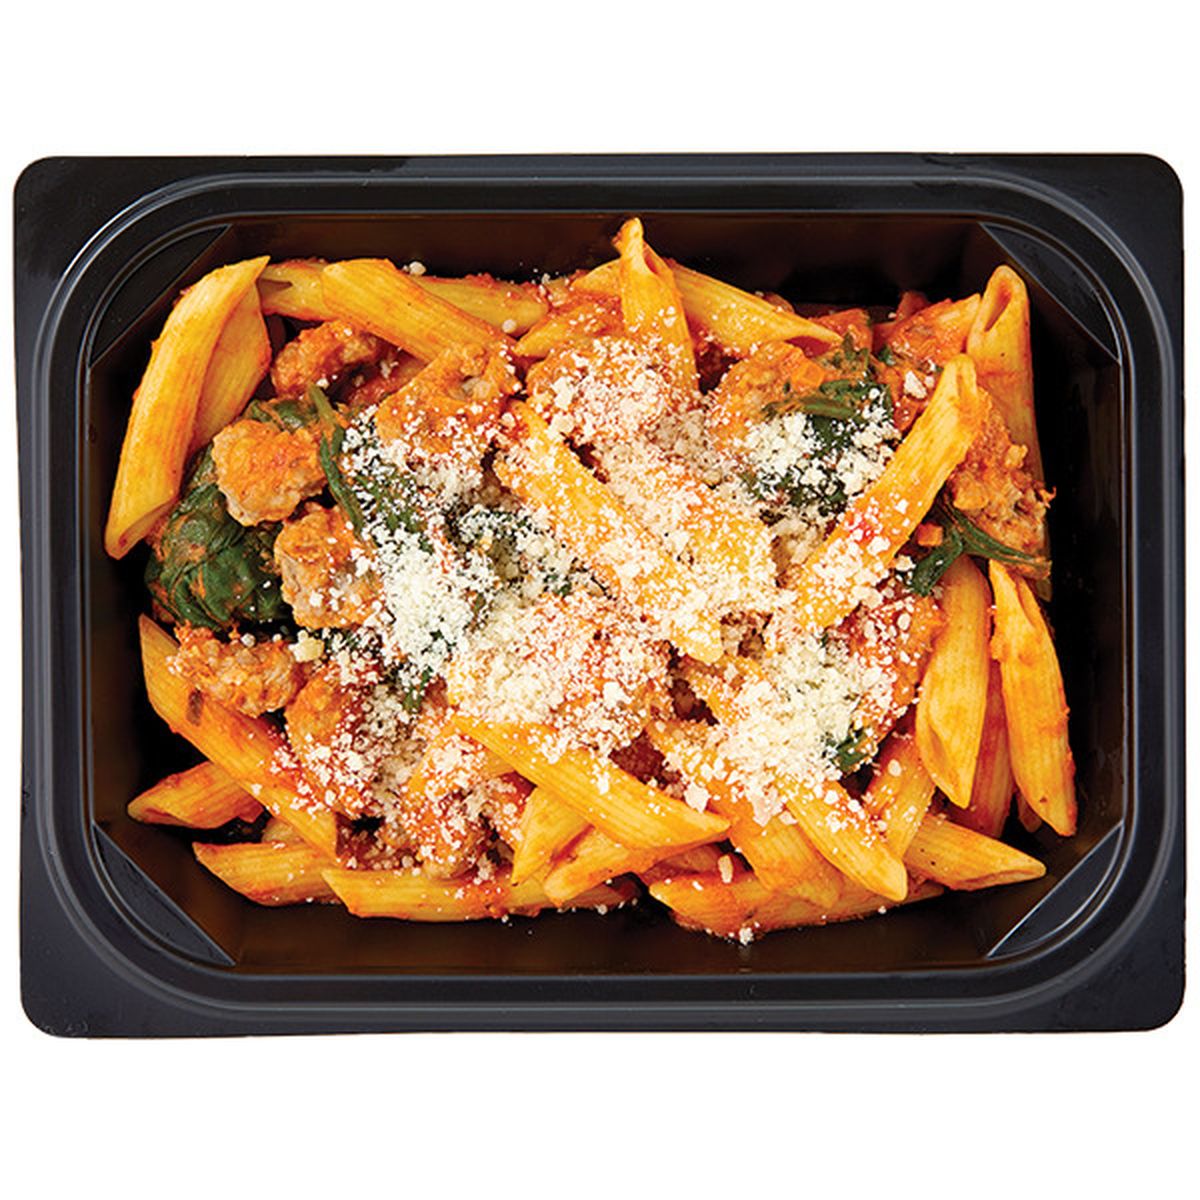 Calories in Wegmans Penne with Sausage, Spinach & Vodka Blush Sauce, Italian, Pasta Bowl